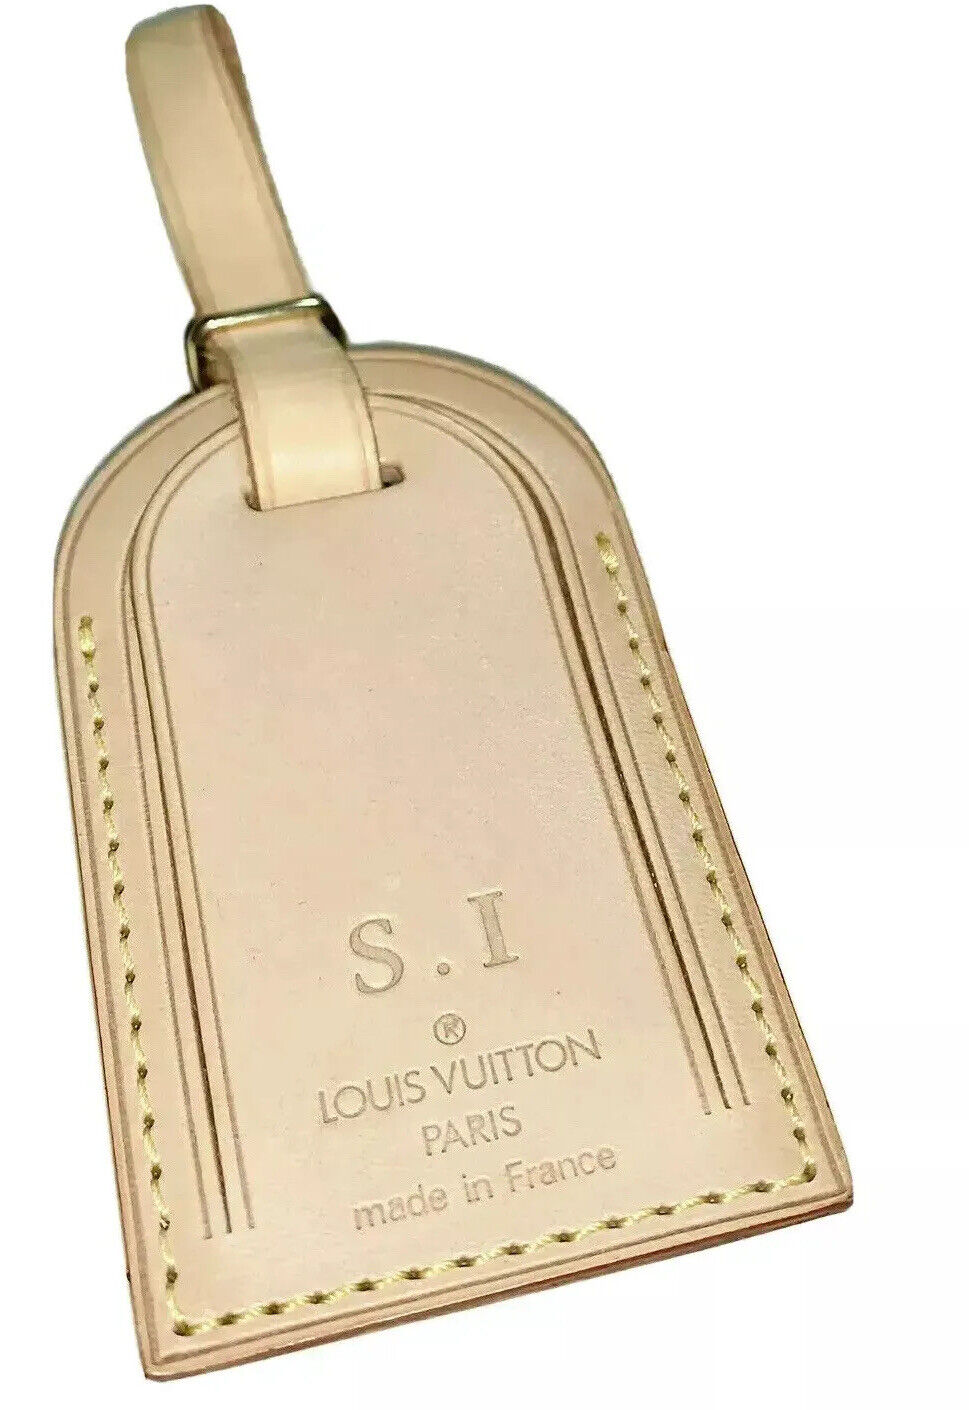 Louis Vuitton Name Tag Goldtone Vachetta Leather w/ SI Initials Large